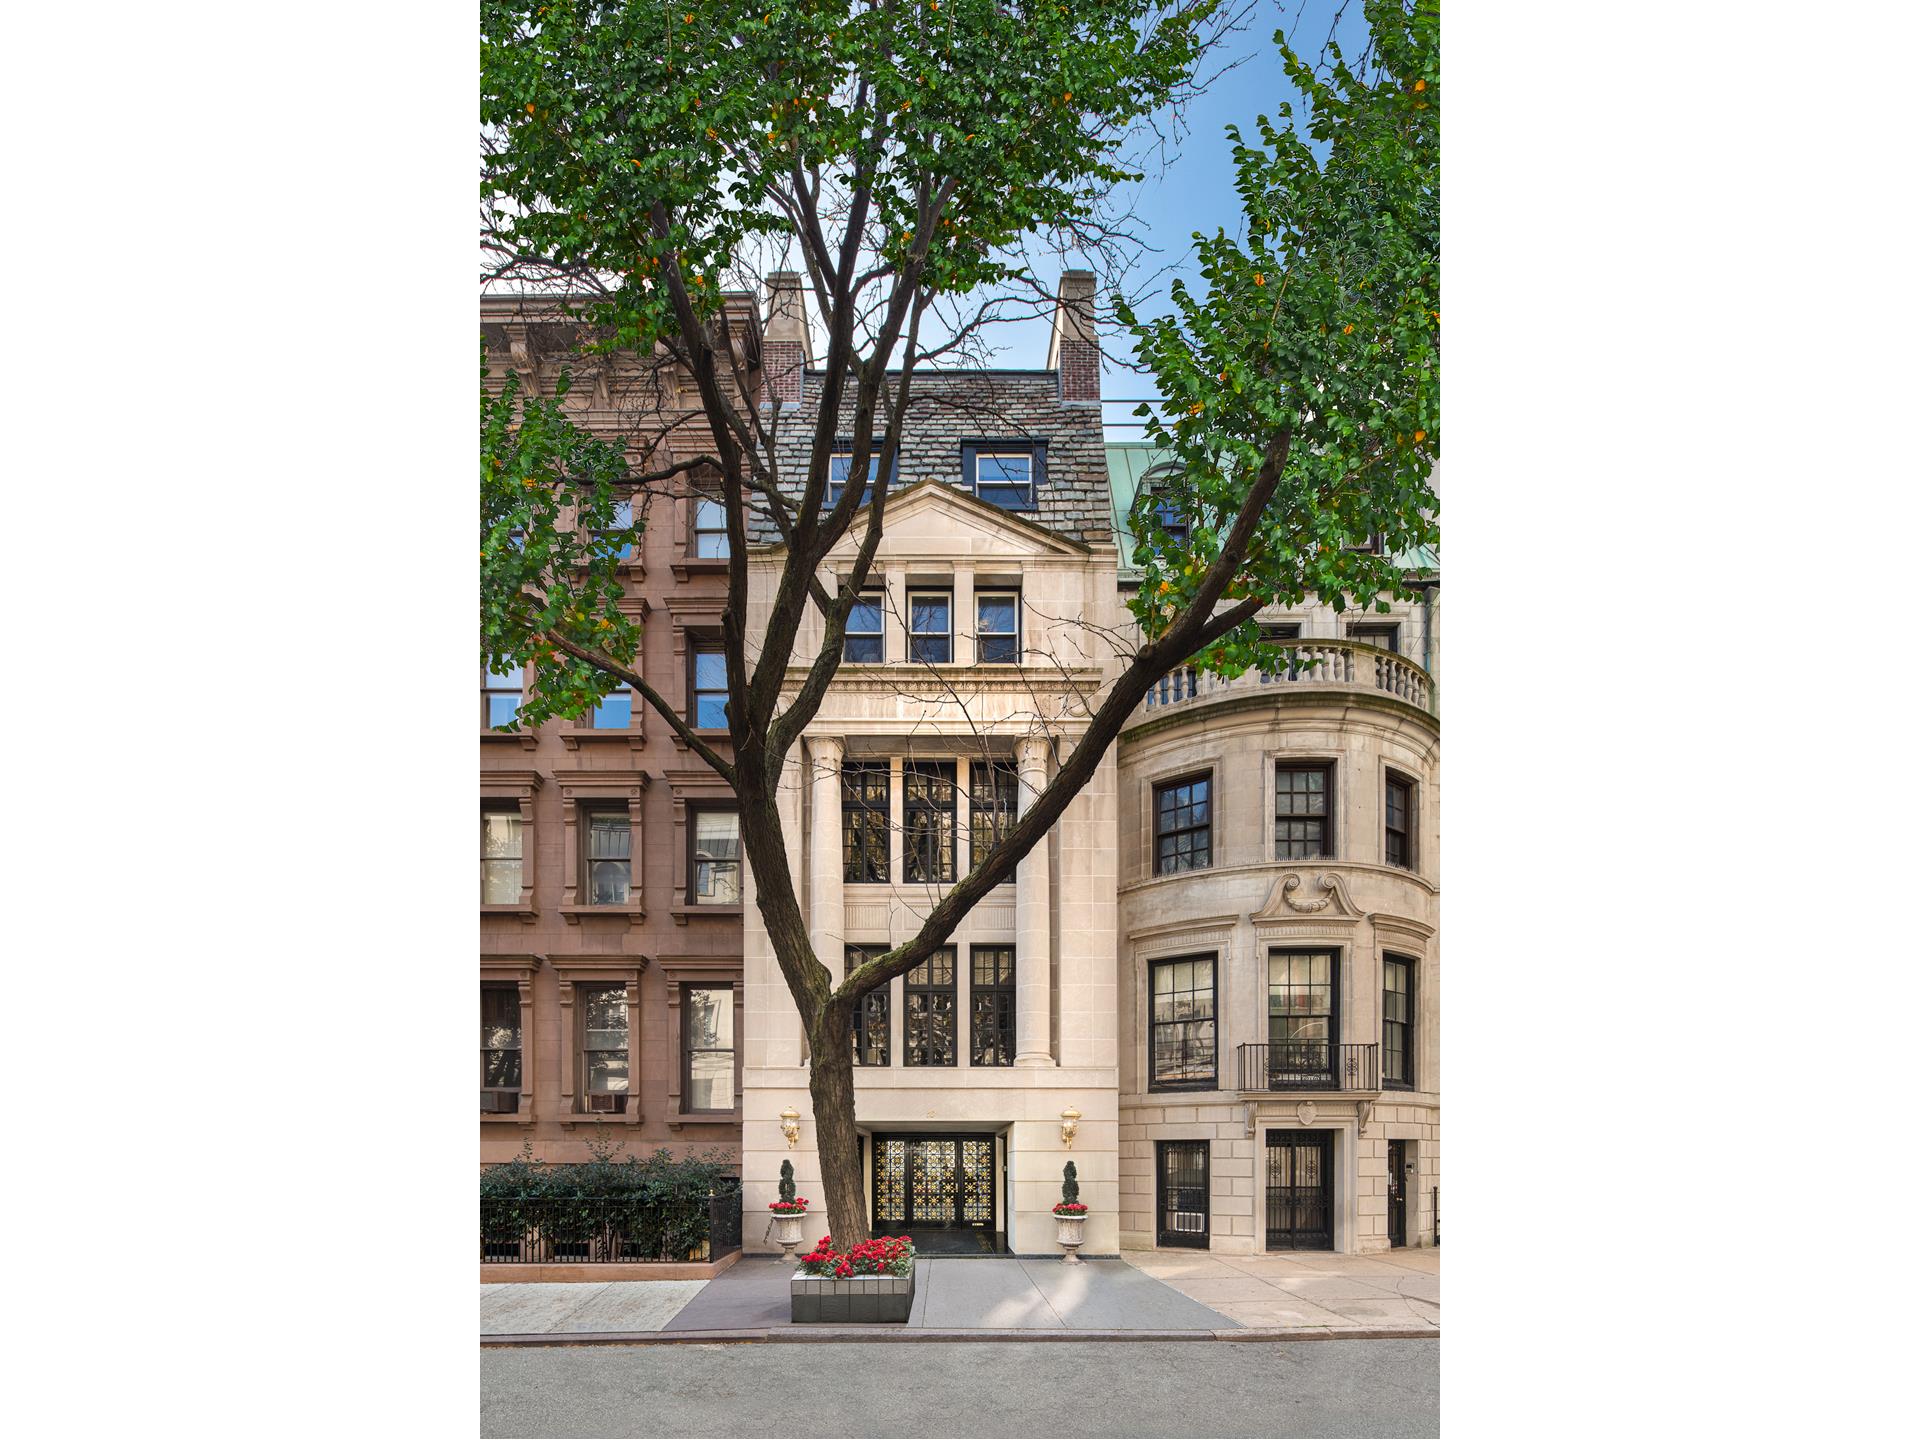 10 East 64th Street, Lenox Hill, Upper East Side, NYC - 5 Bedrooms  5.5 Bathrooms  17 Rooms - 